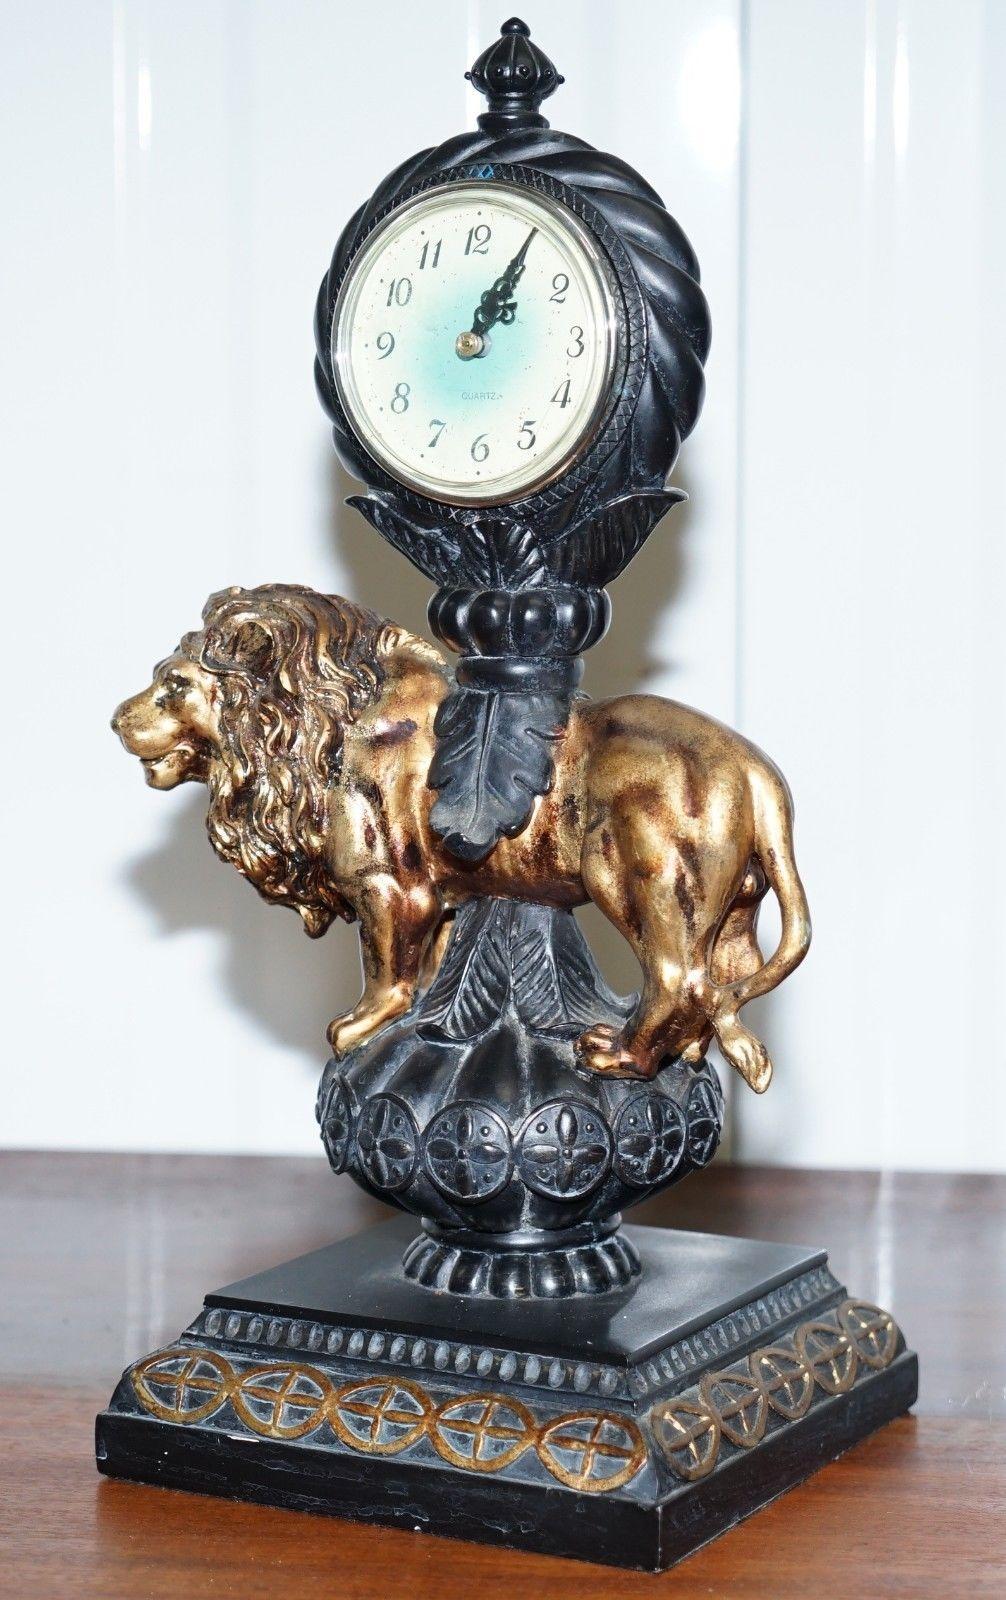 We are delighted to offer for sale this nice decorative mantle clock of a very regal looking Lion 

A very lovely ornate clock, the movement is a modern digital piece 

There's allot of high end detail with this clock as you can see

This